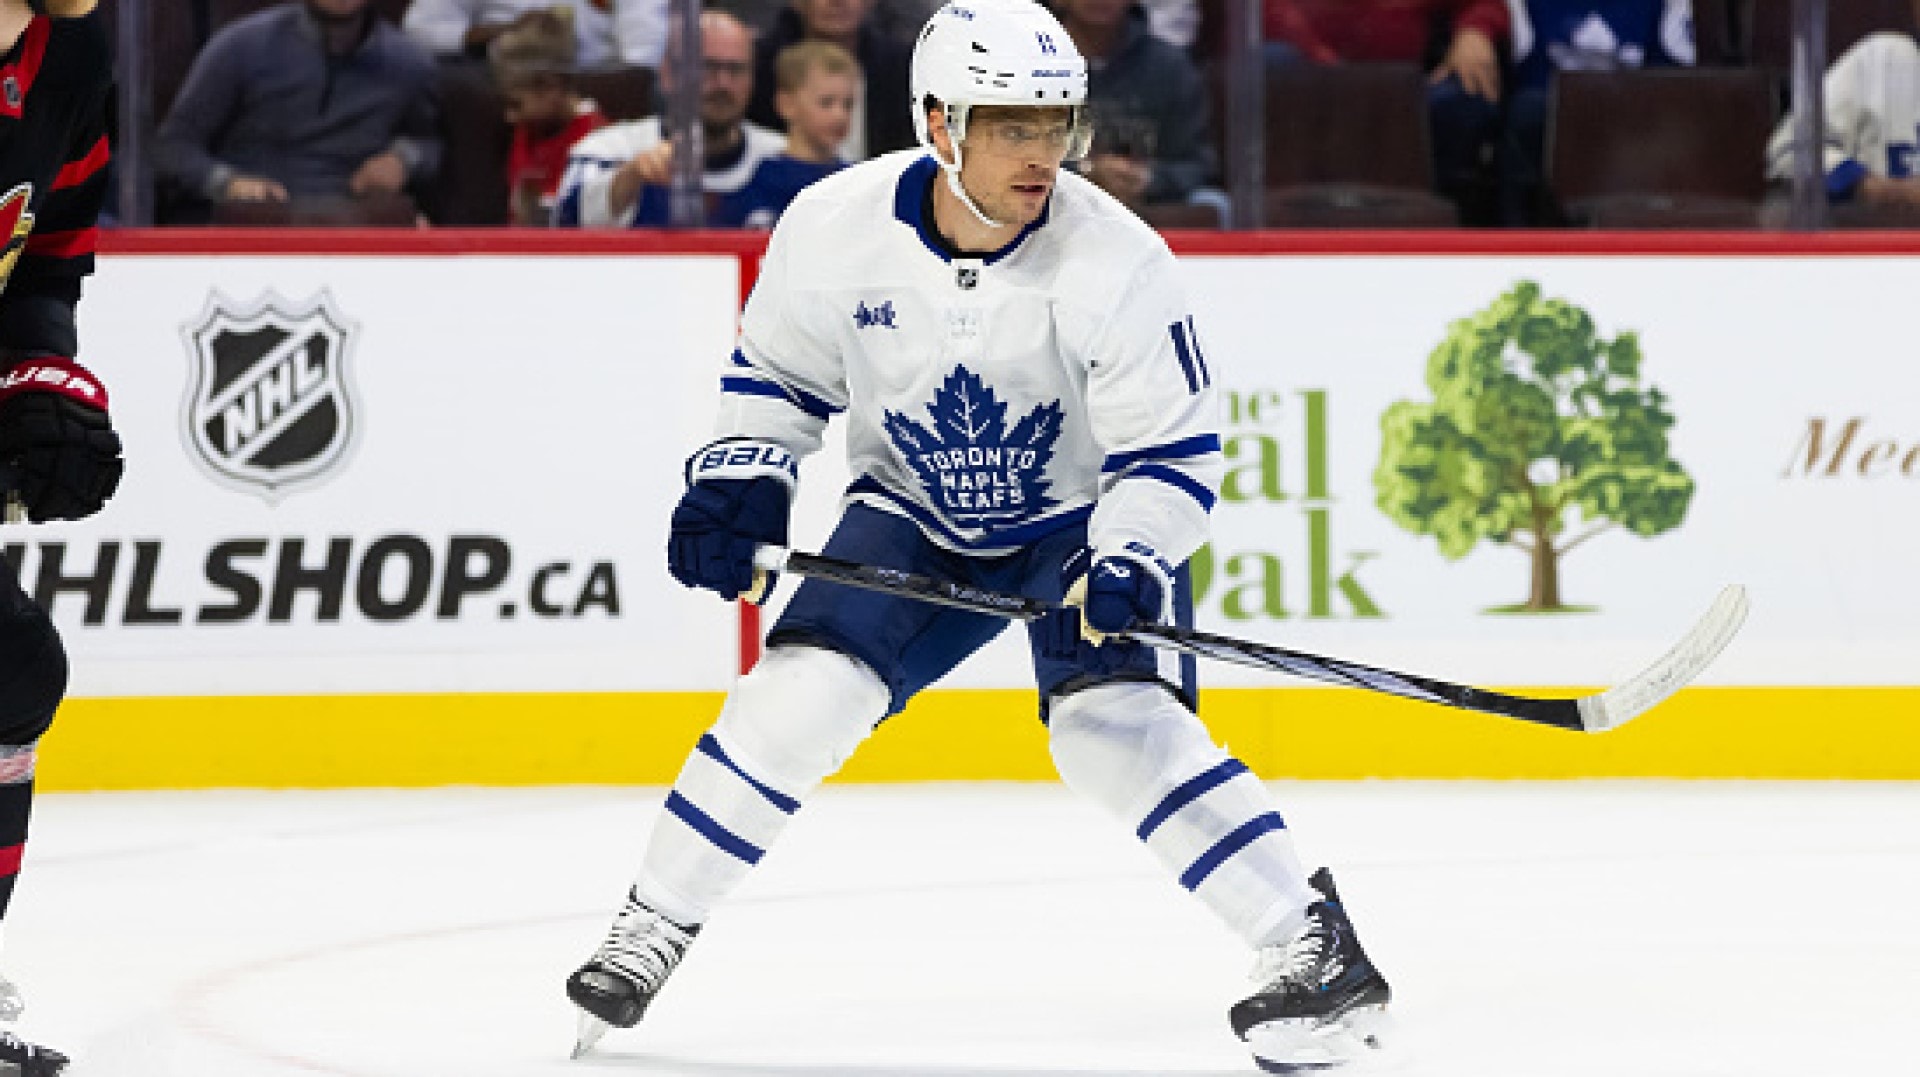 Maple Leafs Notebook: Max Domi's speed and skill surprises as